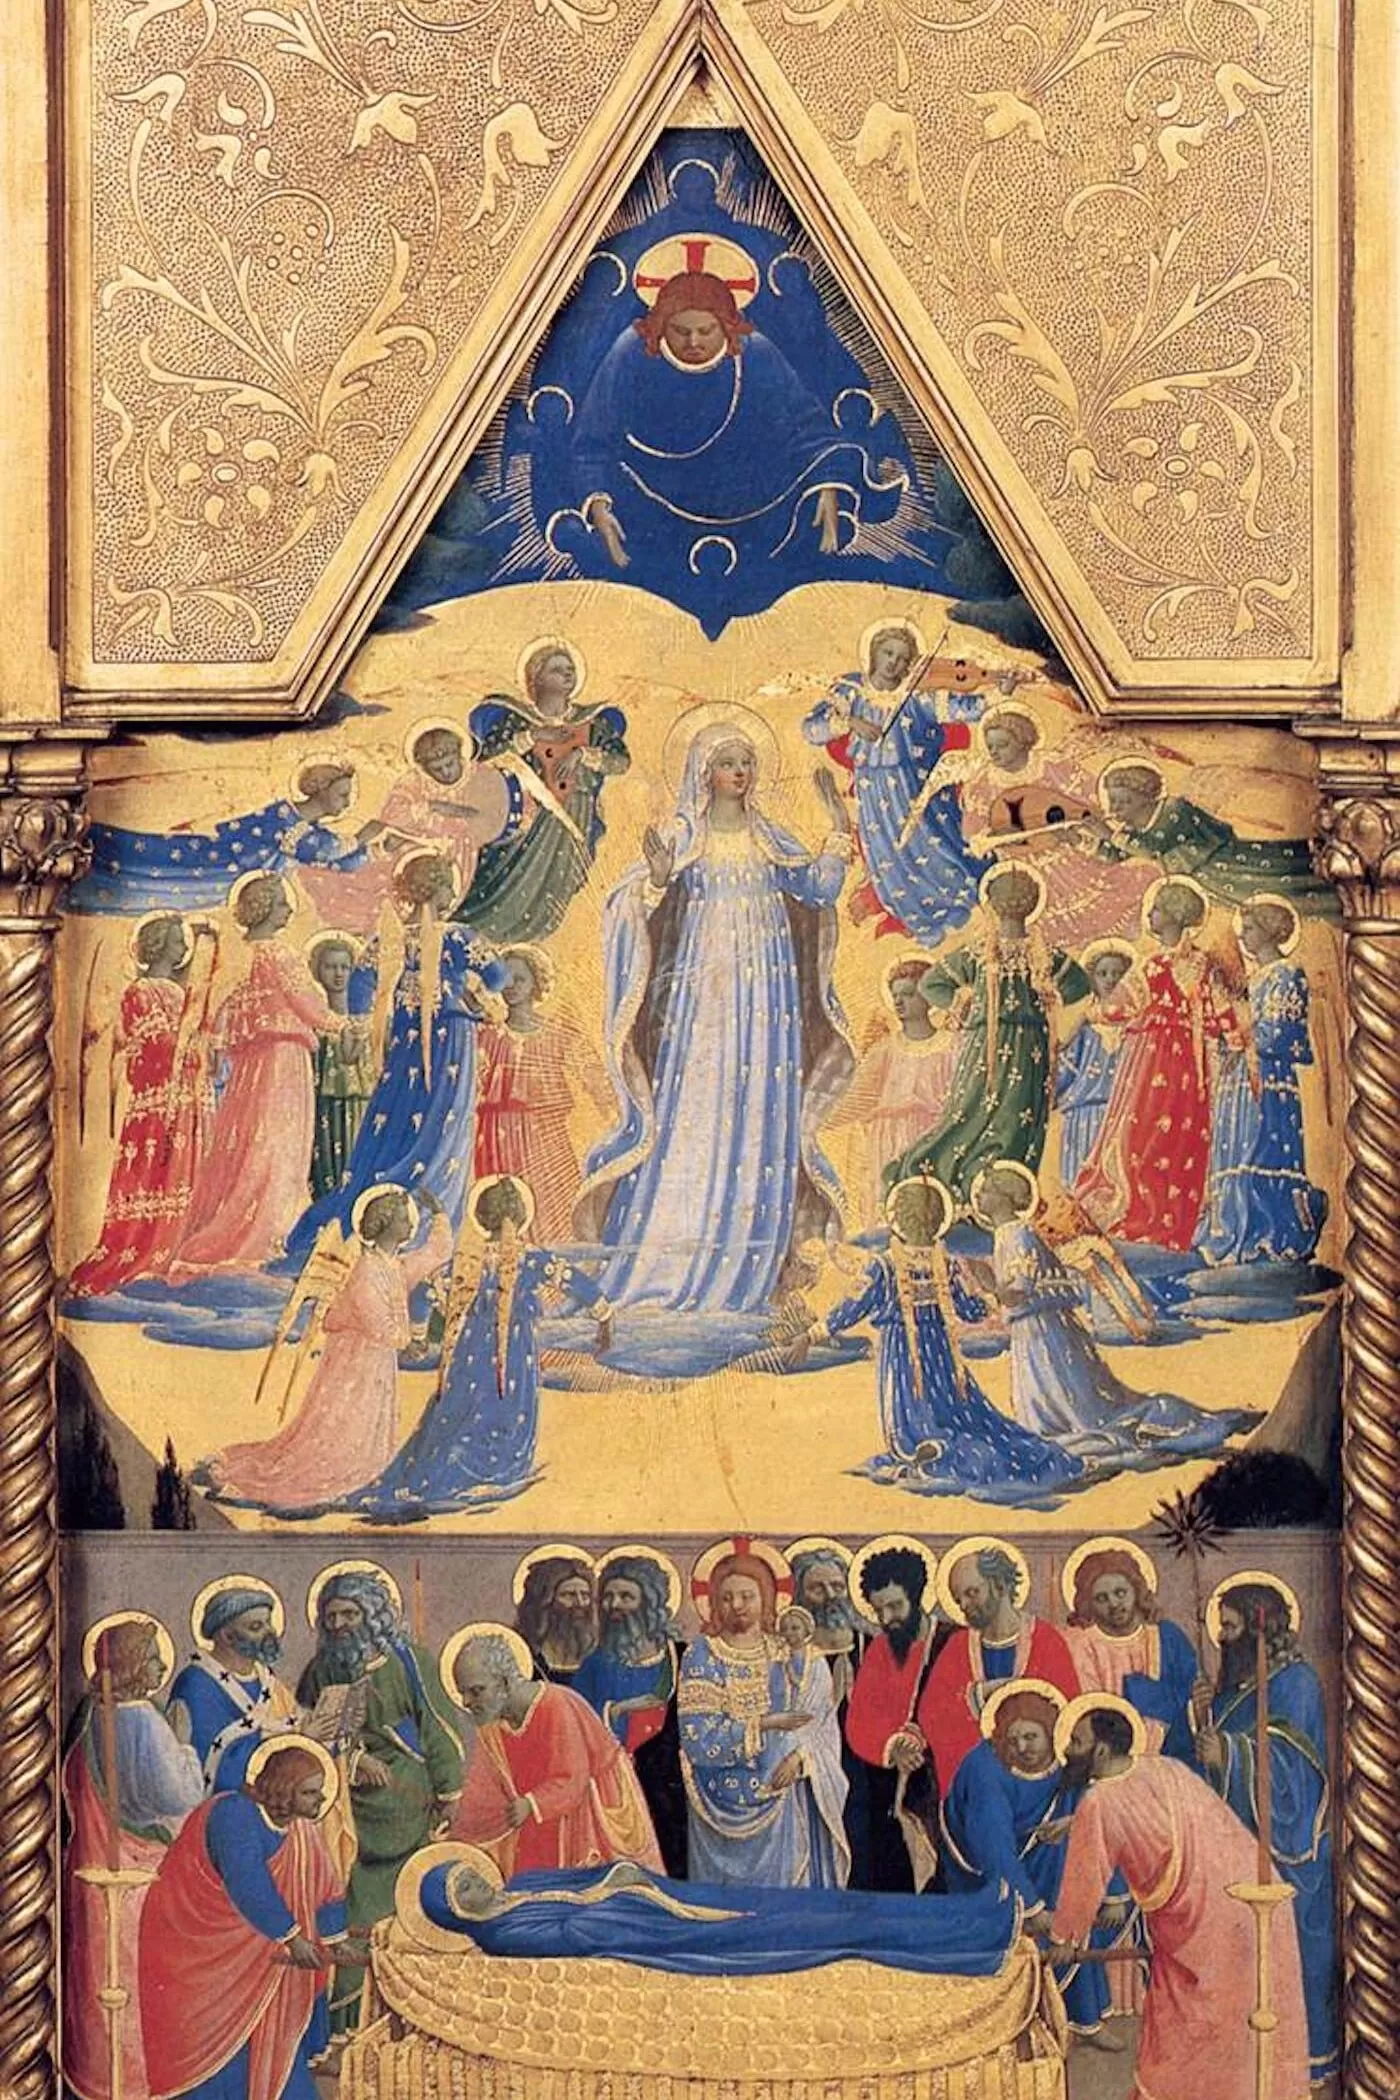 The Fourth Glorious Mystery: The Assumption